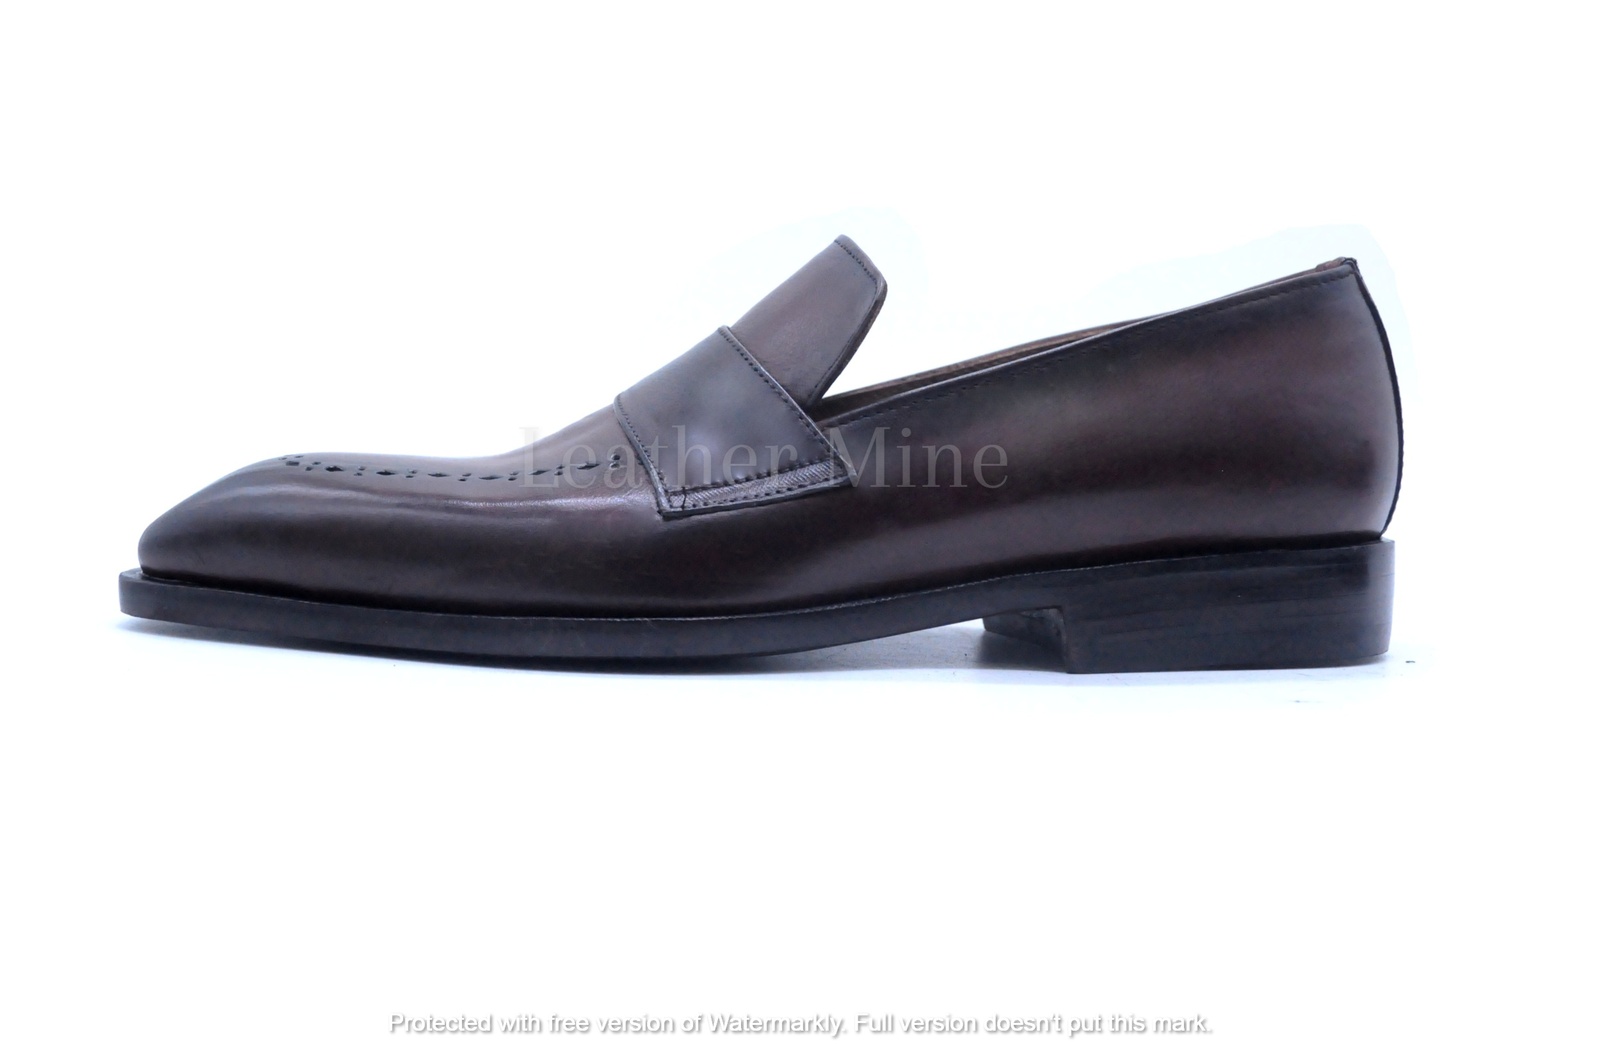 Handmade Ox Blood Loafers Dress Shoes, Genuine Leather Formal Shoes